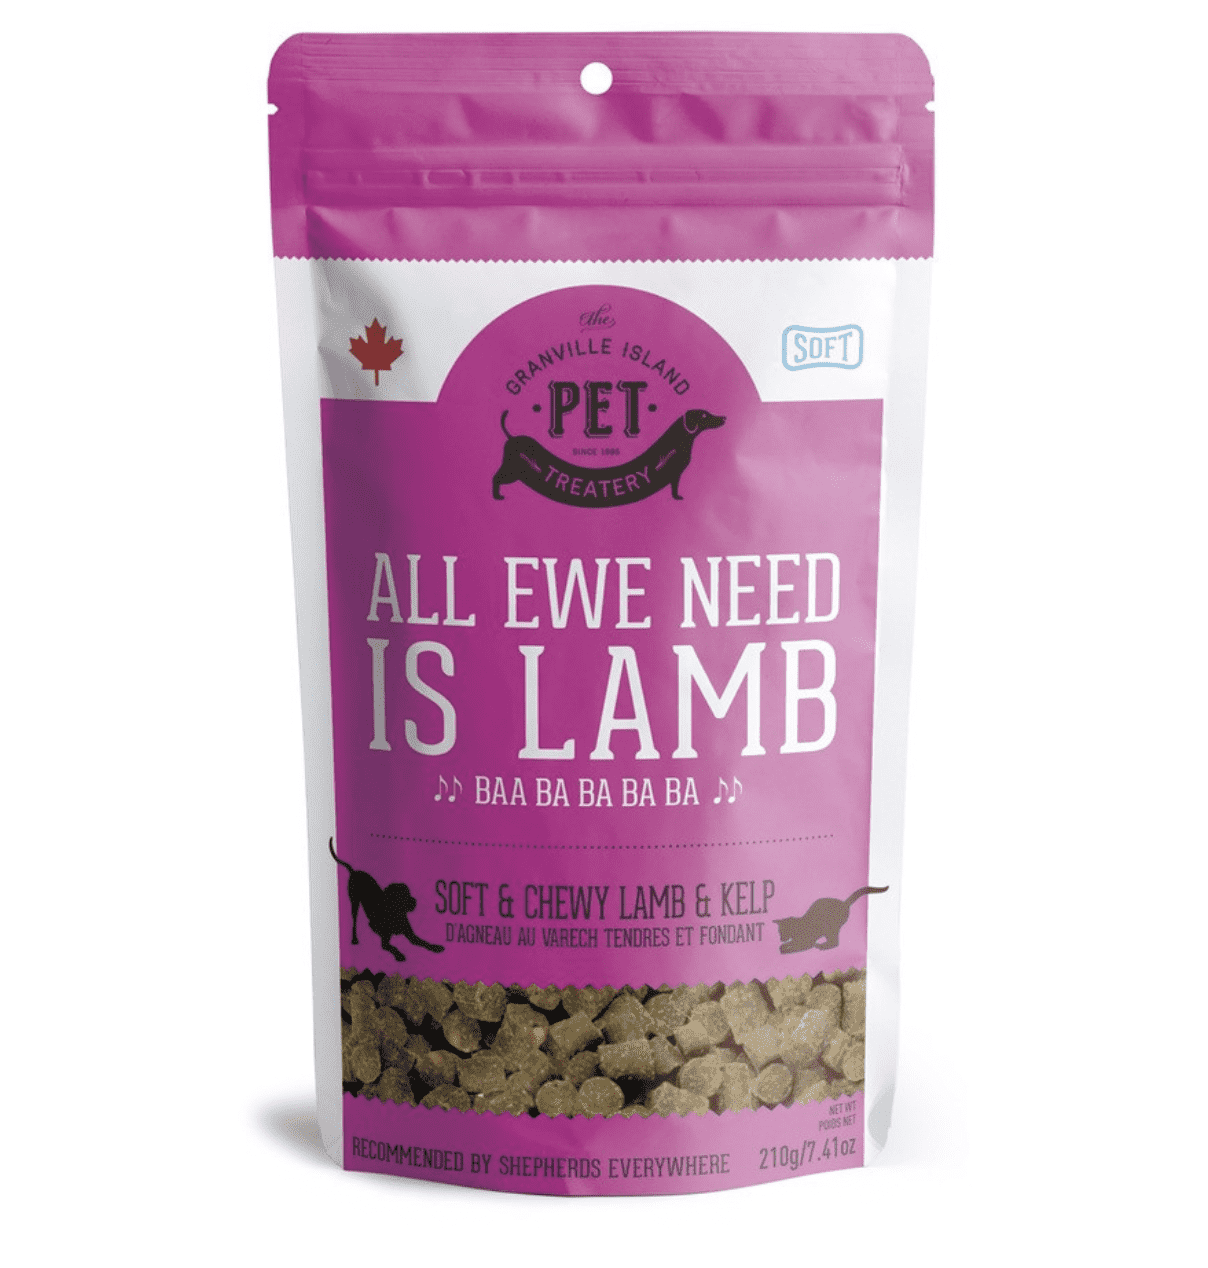 All Ewe Need is Lamb Soft and Chewy Dog Treats.